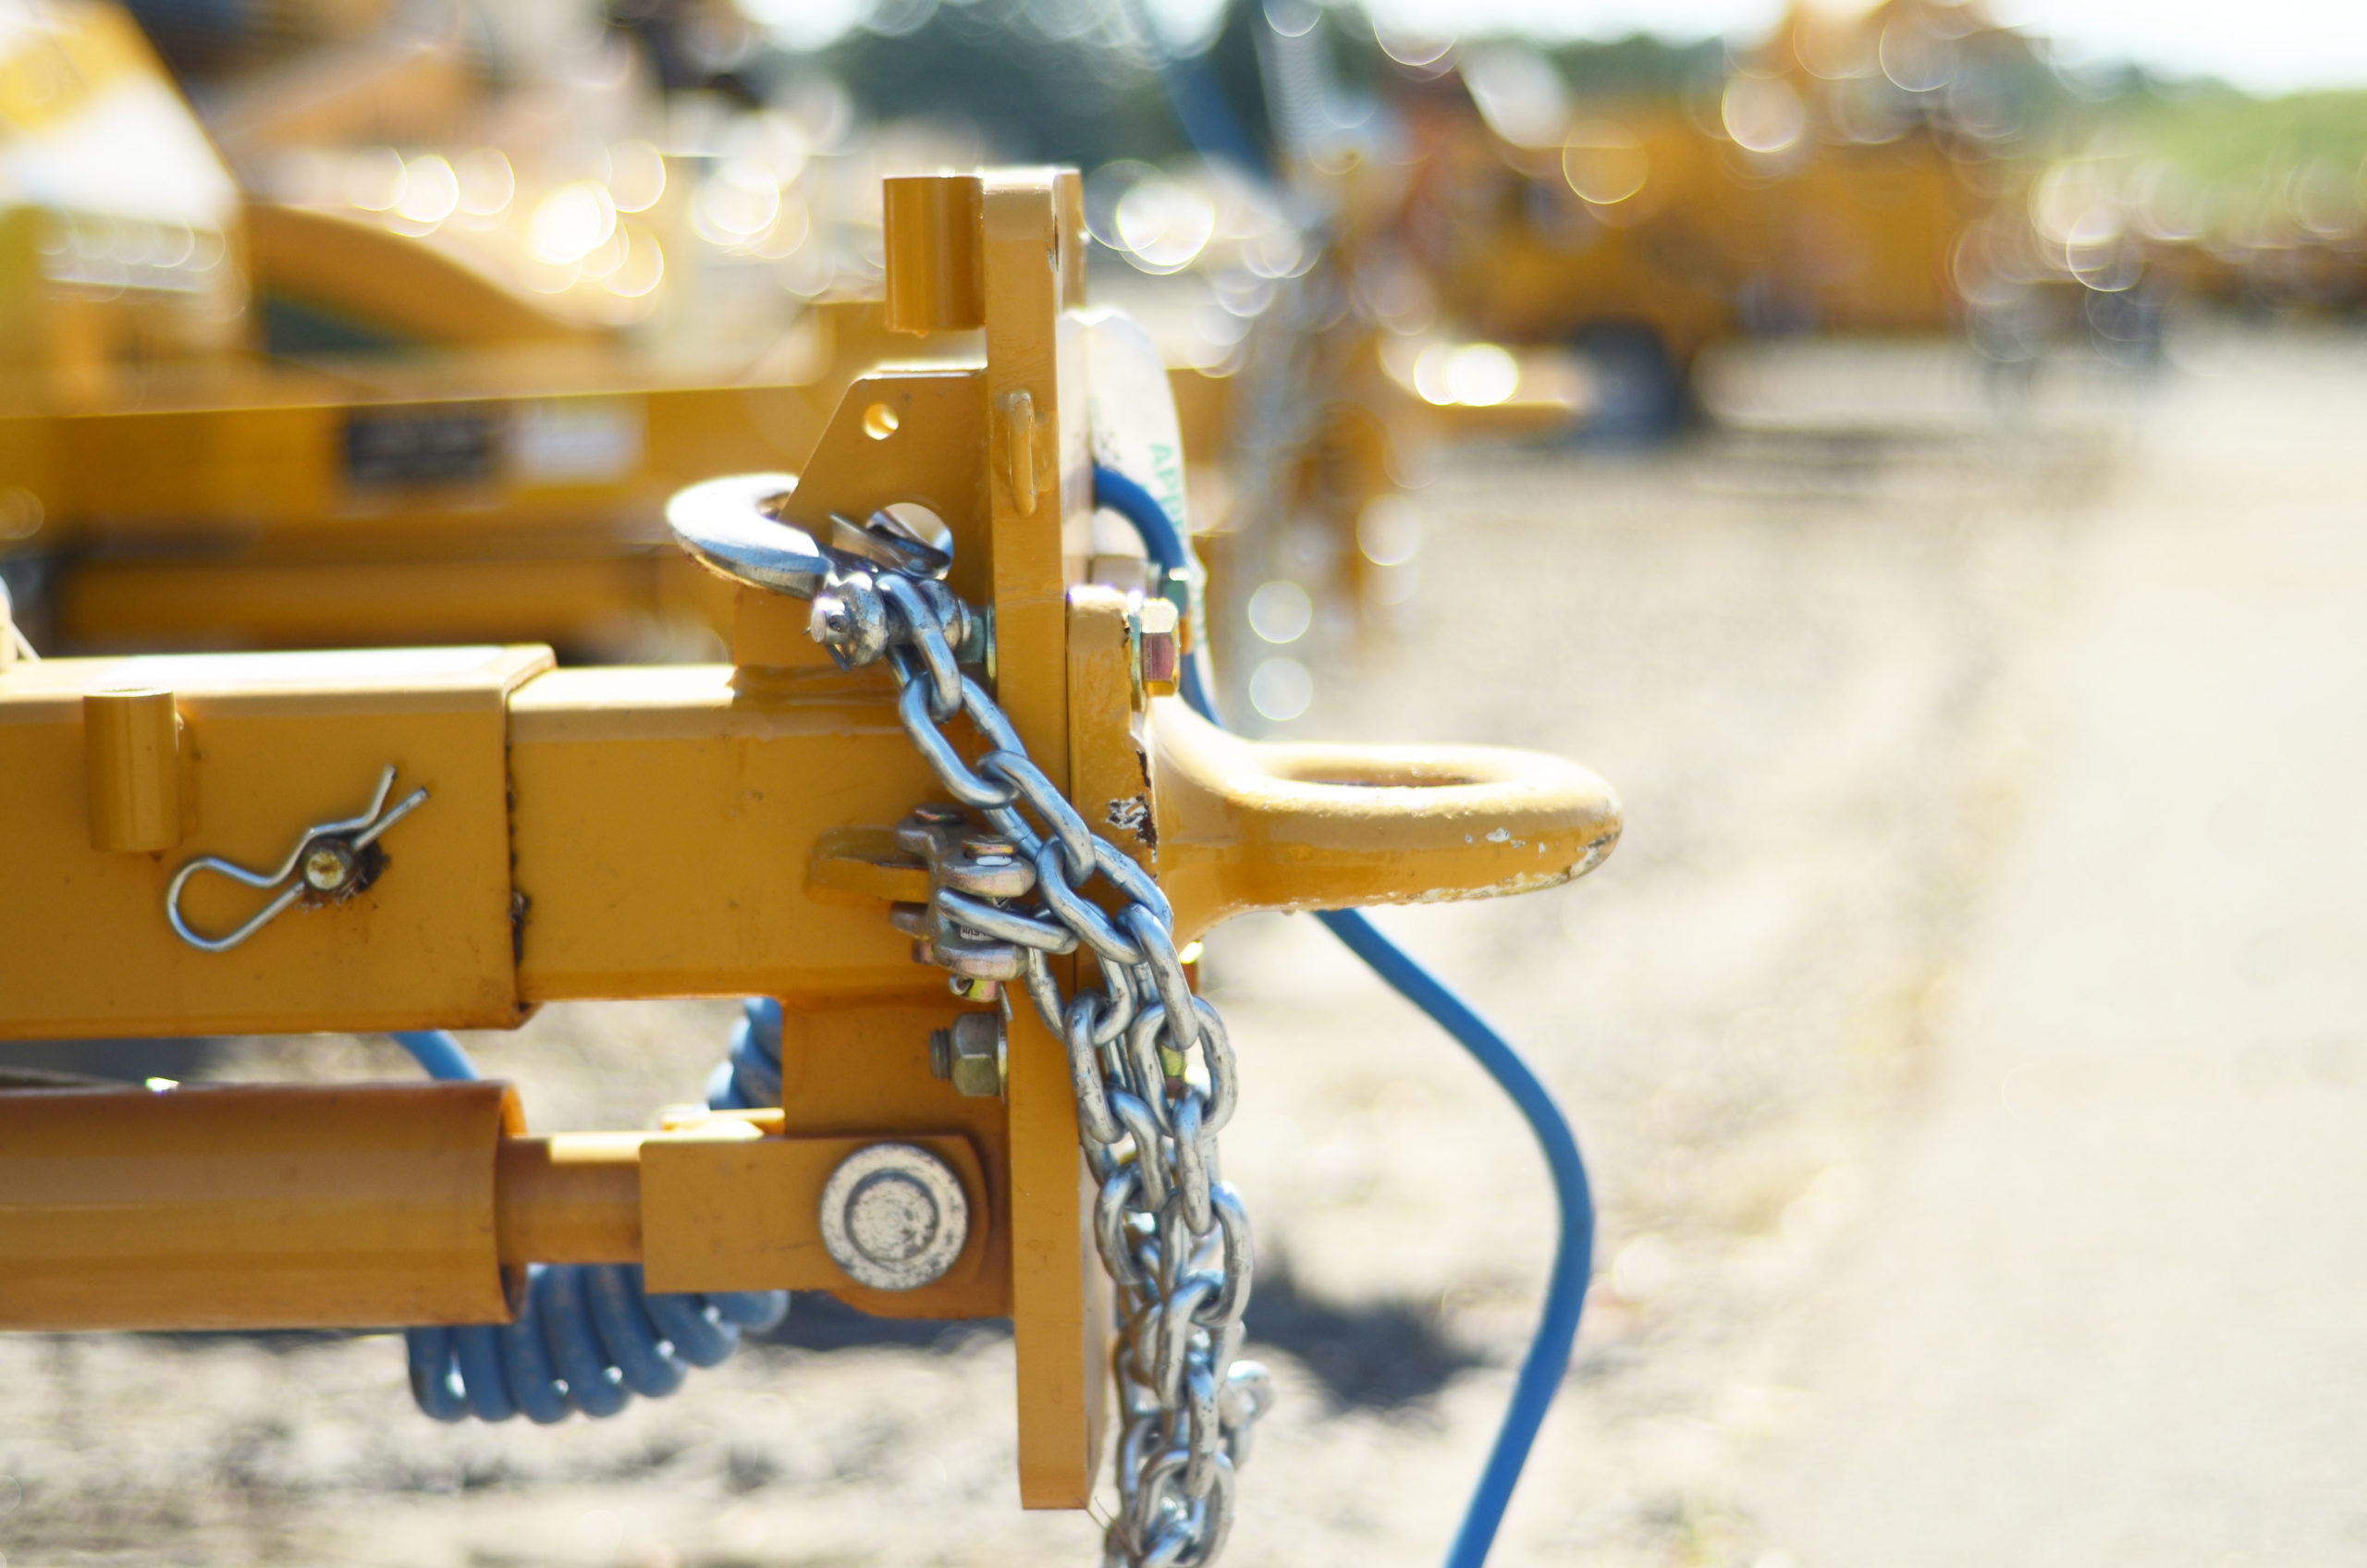 Safety chains and electrical hookups